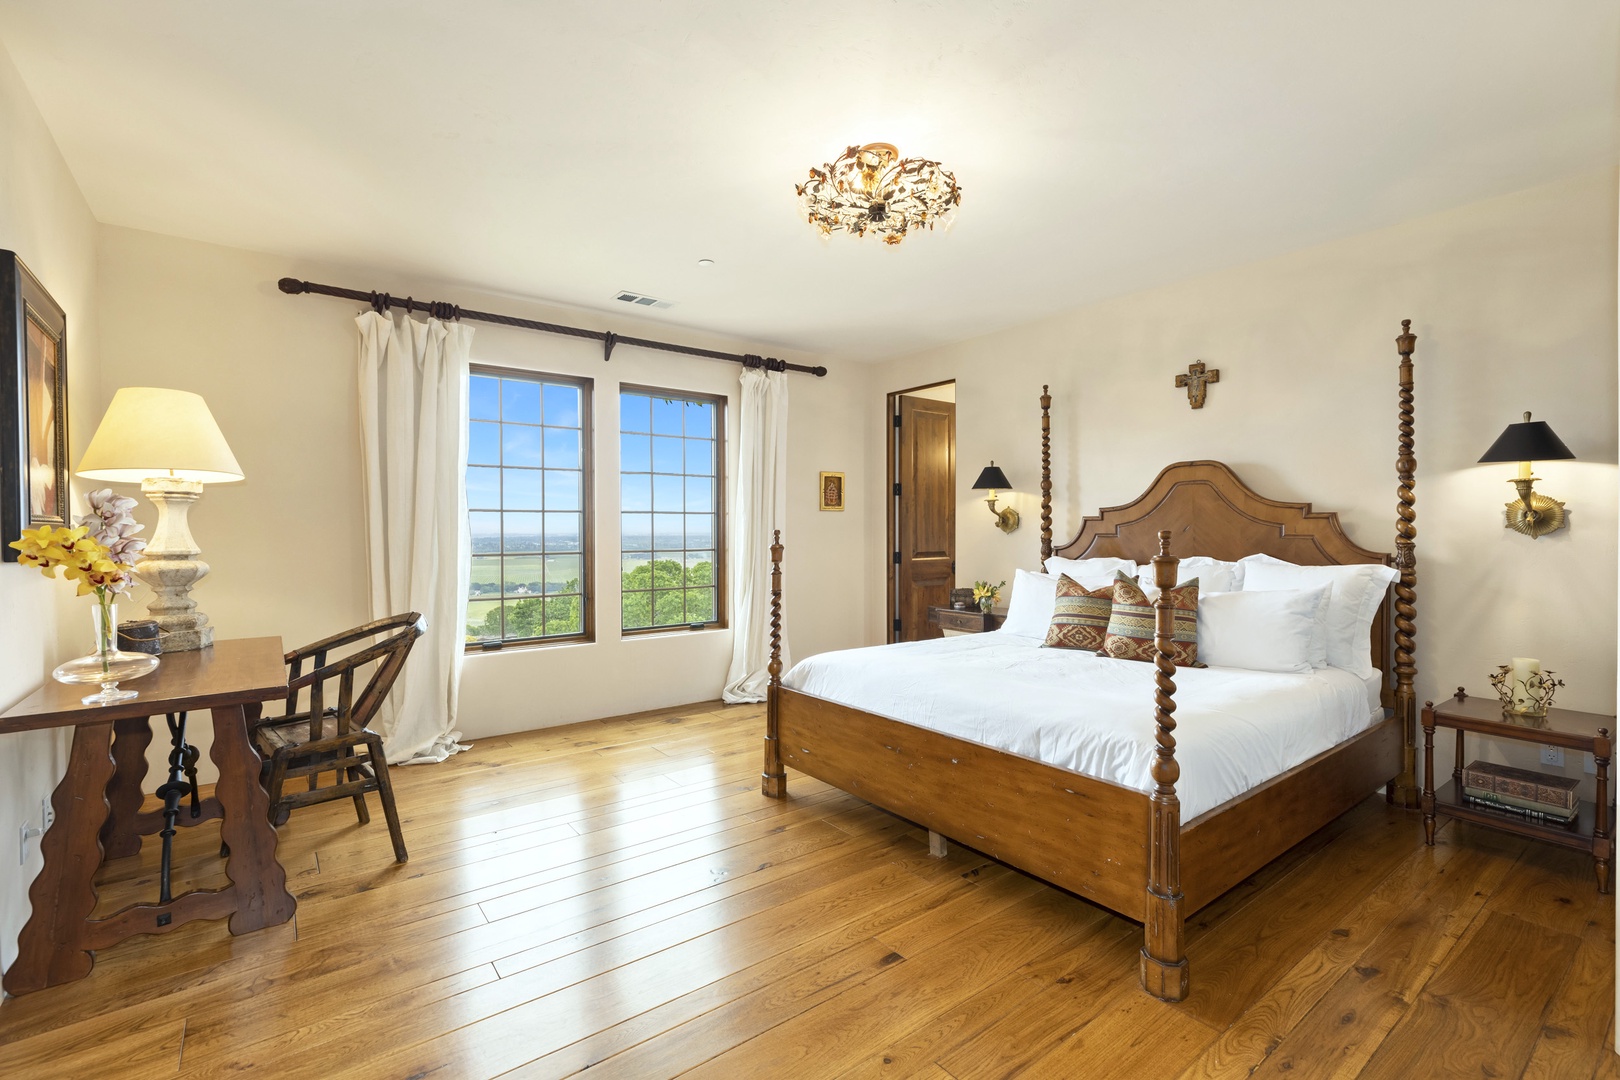 Fairfield Vacation Rentals, Villa Capricho - The first bedroom on the right, located on the second floor, is the primary suite and features a king bed, luxurious furnishings, and absolutely breathtaking views of the vineyards